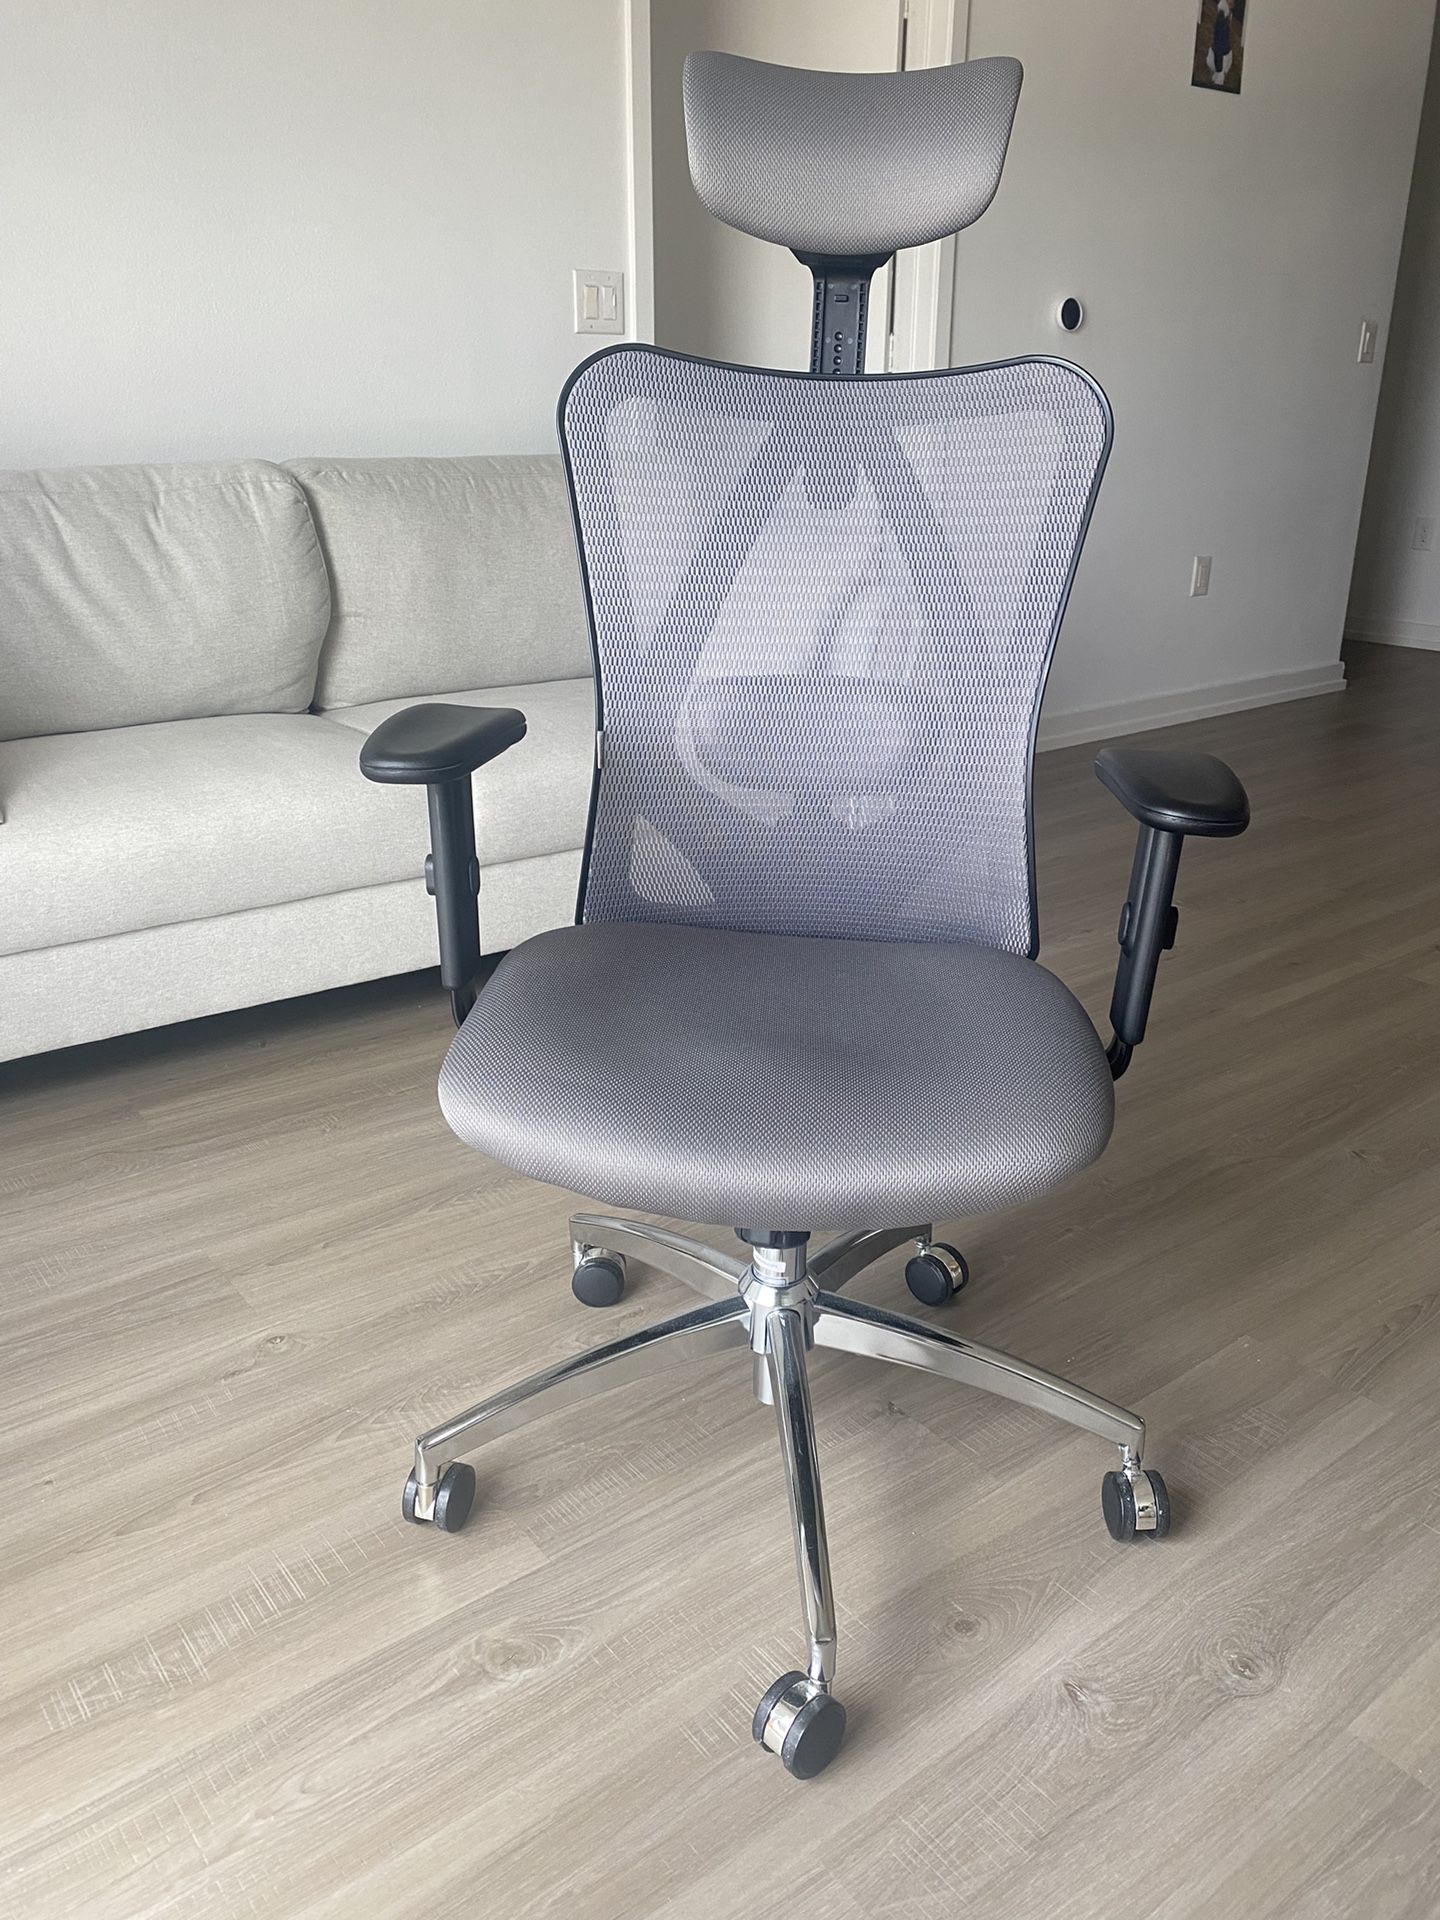 Office chair with Reclining back(barely used)